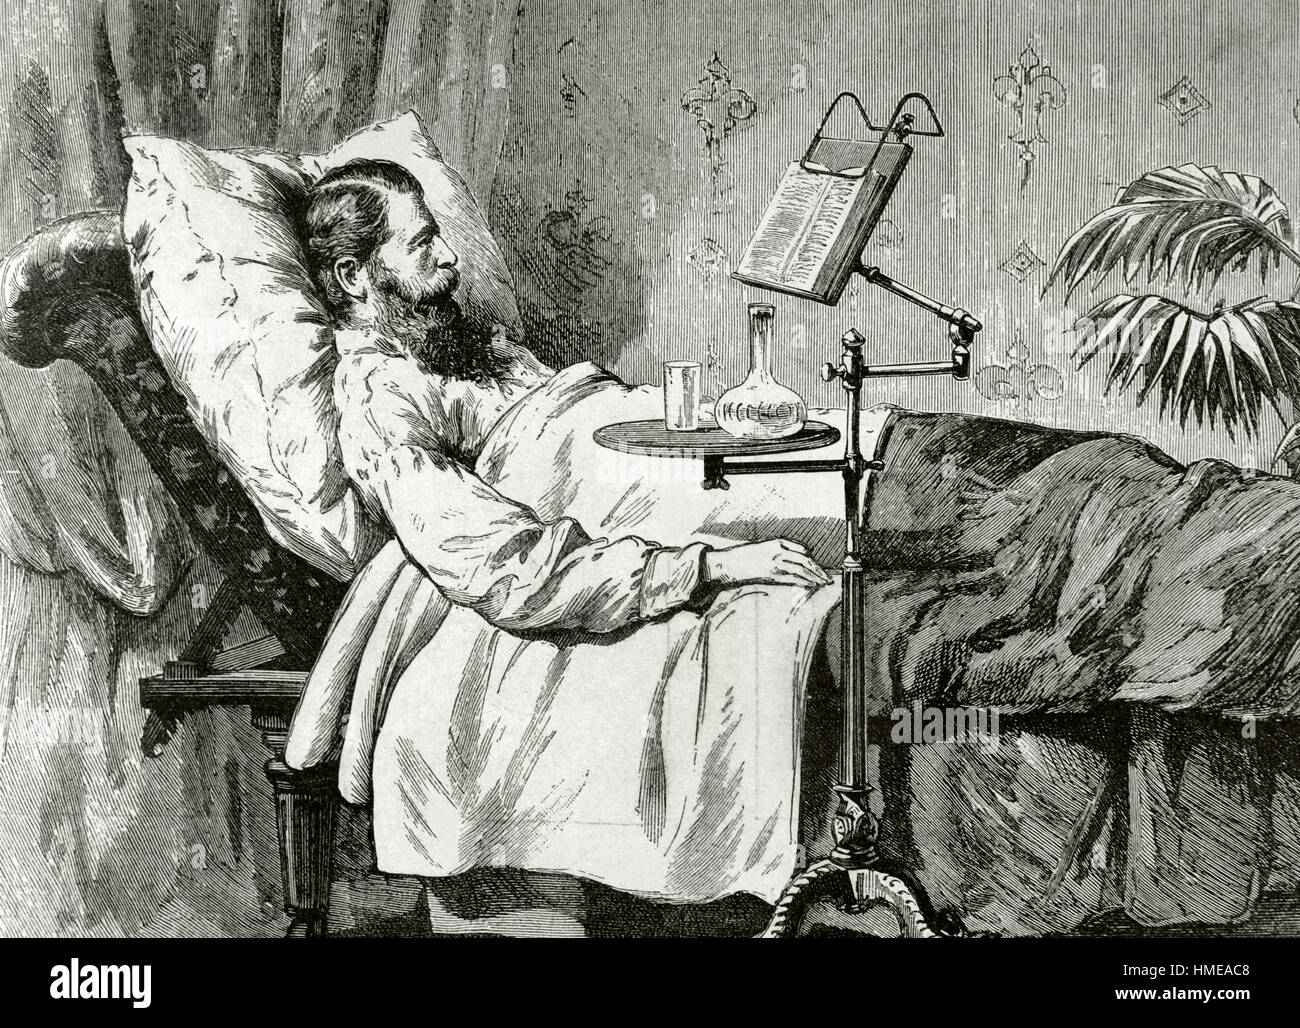 Frederick William IV (1795-1861). King of Prussia. The King in on his deathbed, in an improvised study cabinet. The Artistic Illustration, VII, number 334, May 21, 1888. Engraving. Stock Photo